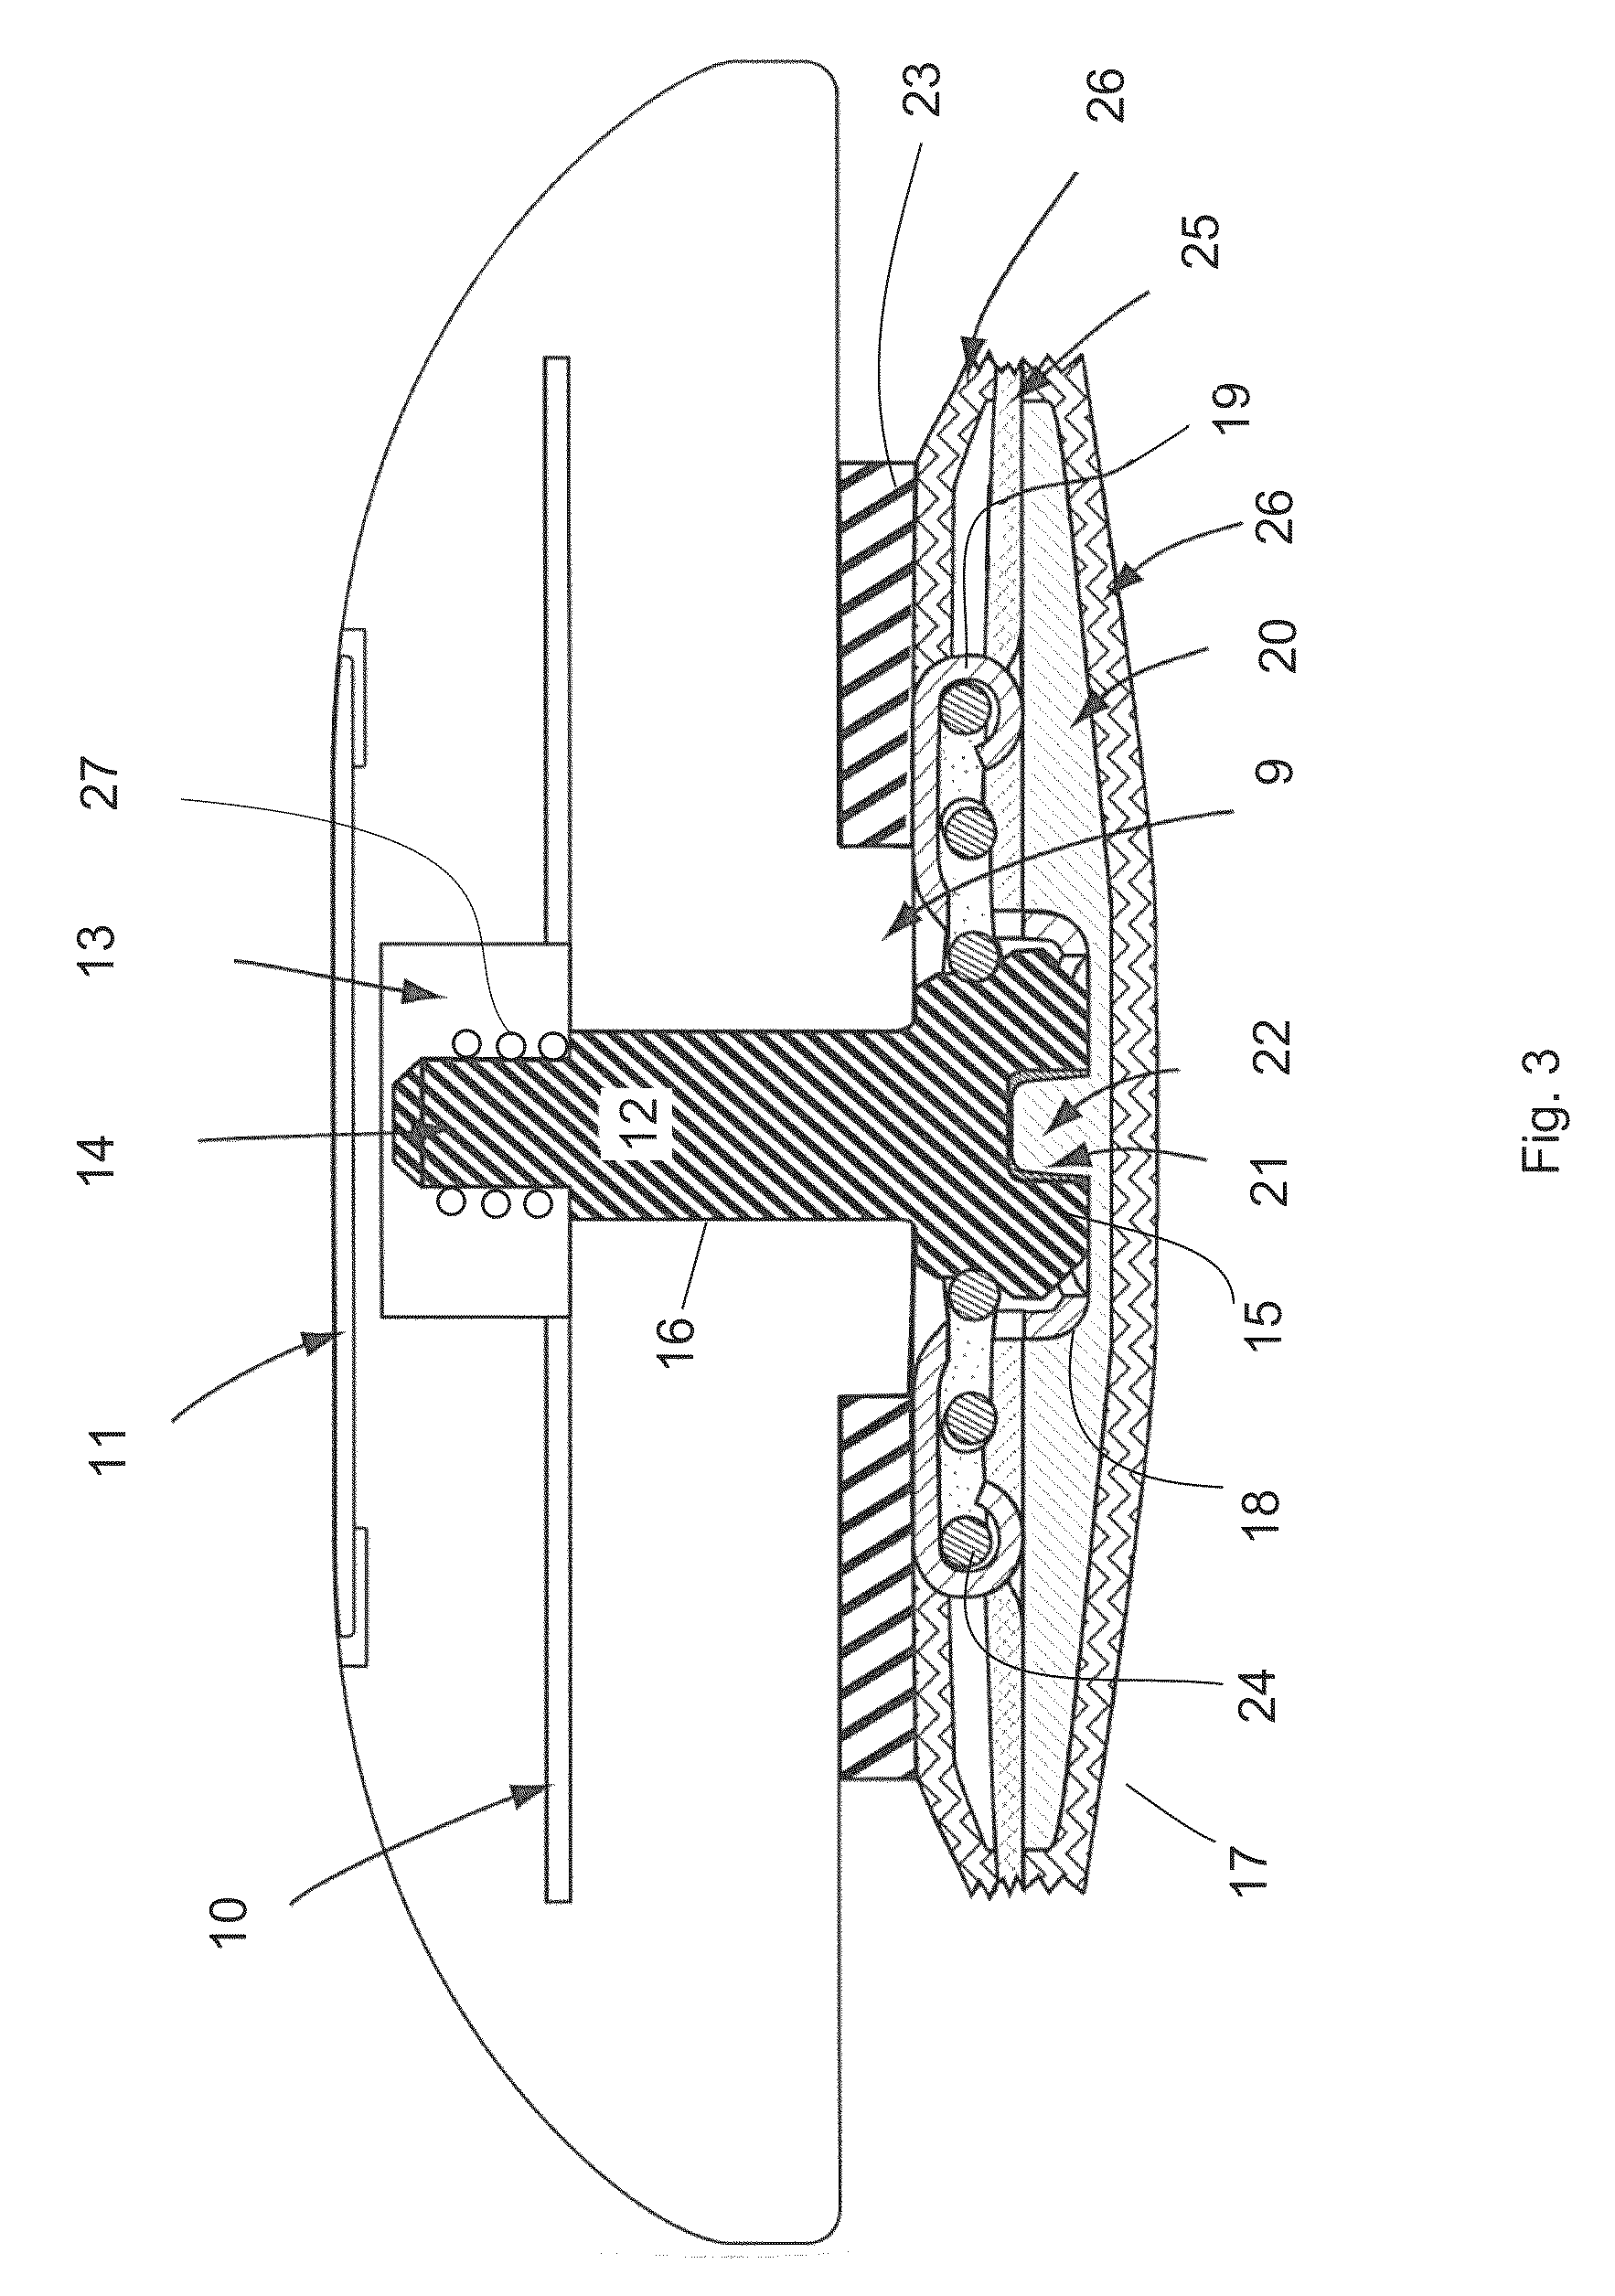 Device and method for assembling an electronic device and a flexible element for facilitating assembly of electronic components